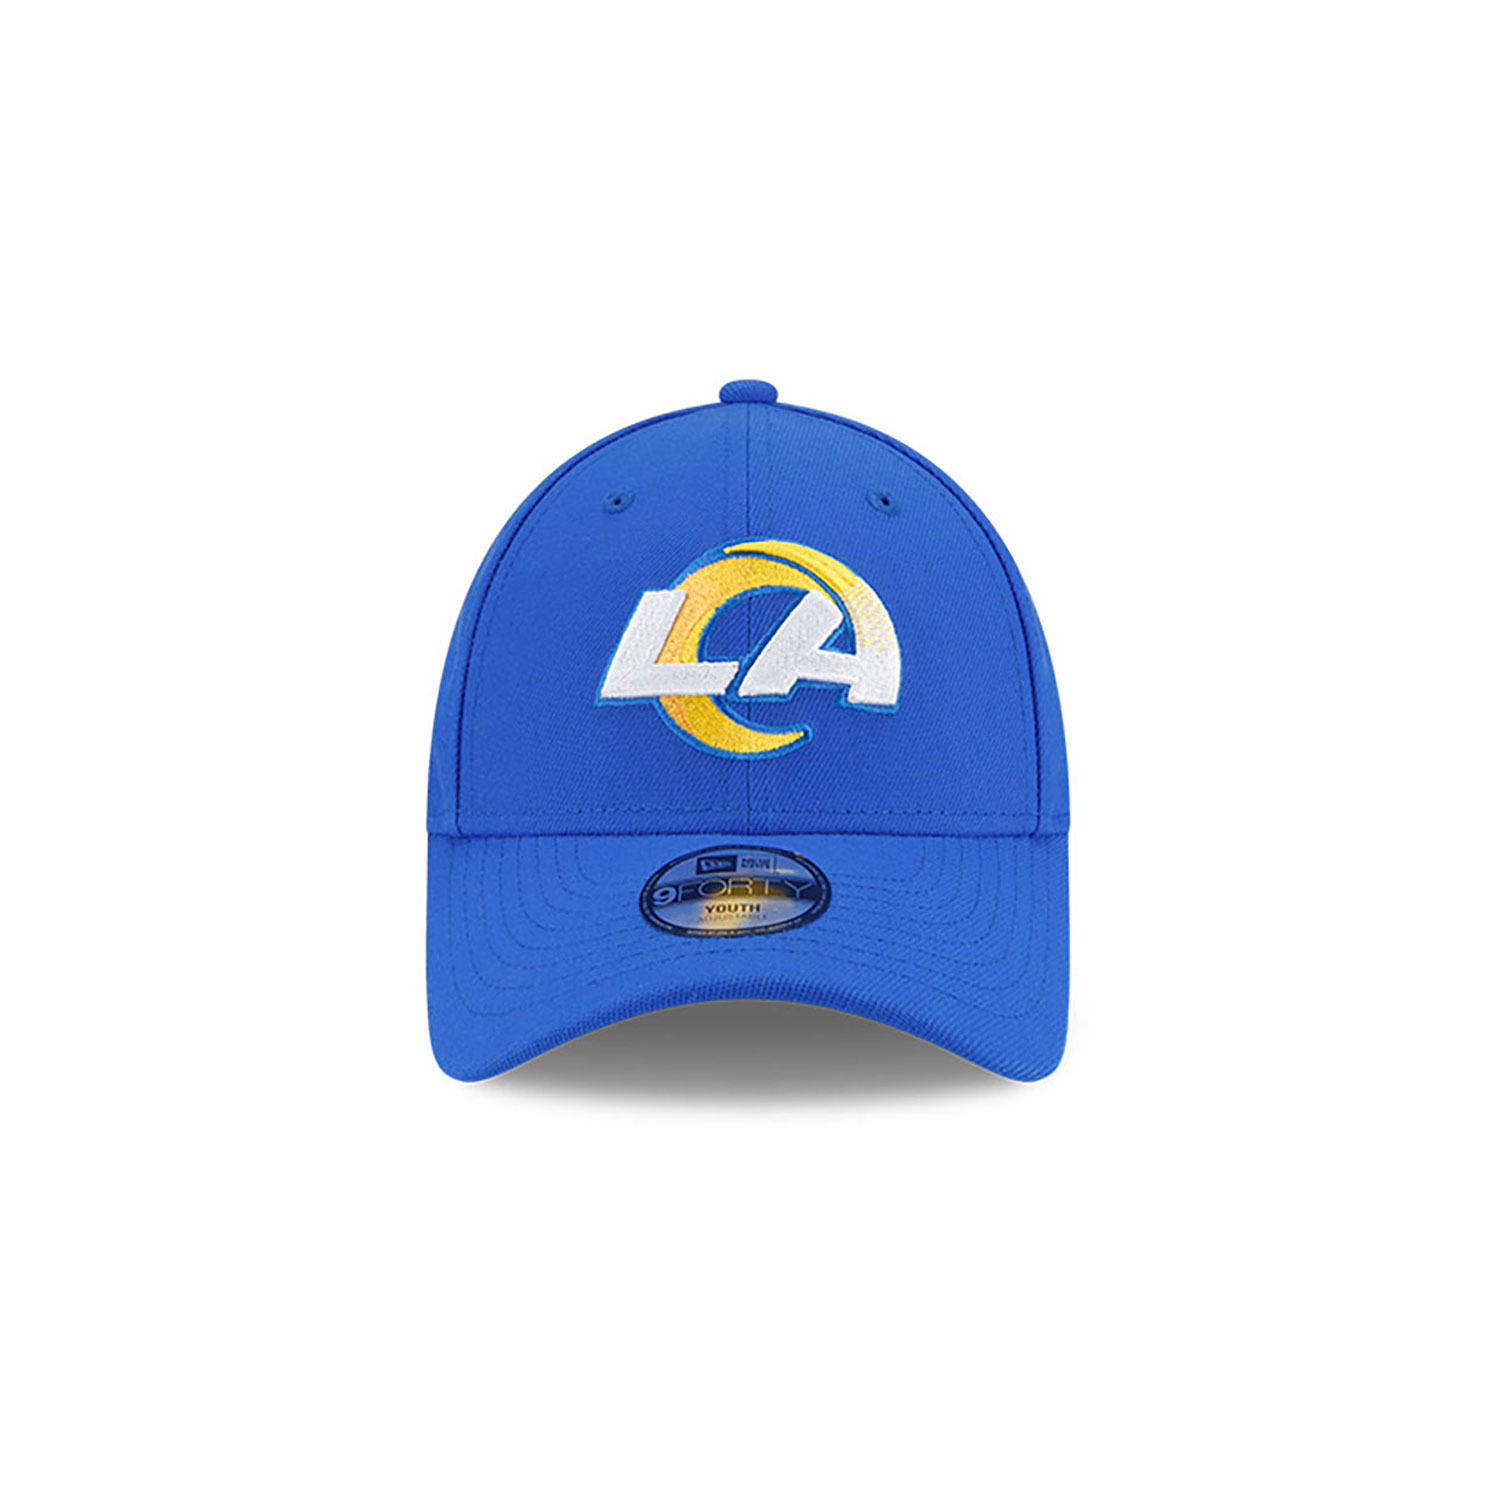 LA Rams Youth The League Blue 9FORTY Adjustable Cap